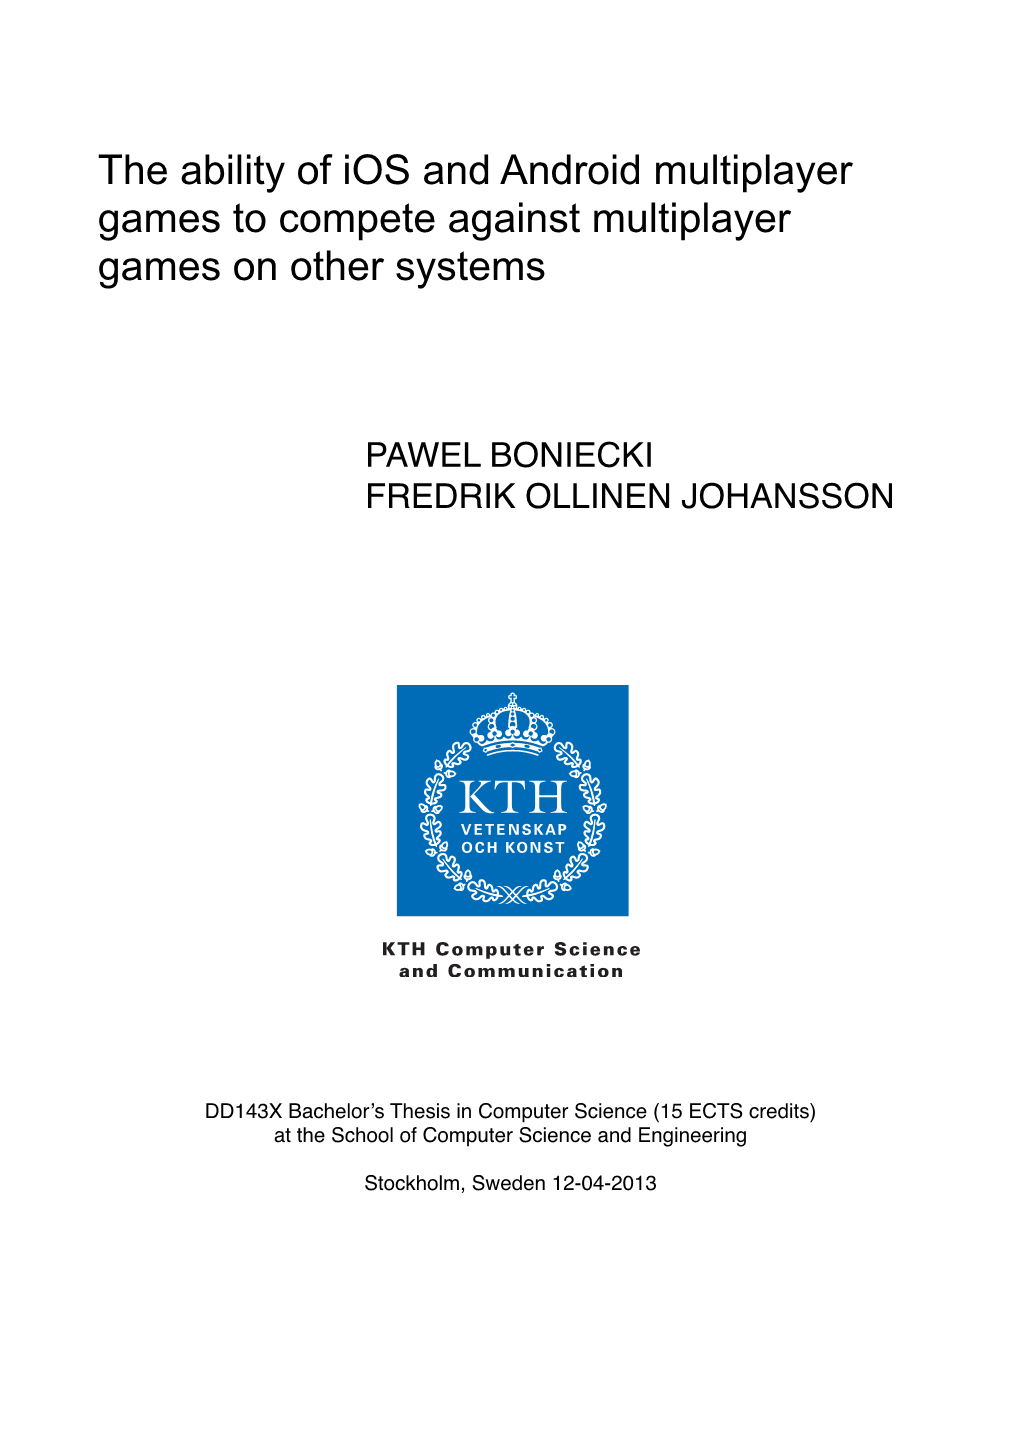 The Ability of Ios and Android Multiplayer Games to Compete Against Multiplayer Games on Other Systems